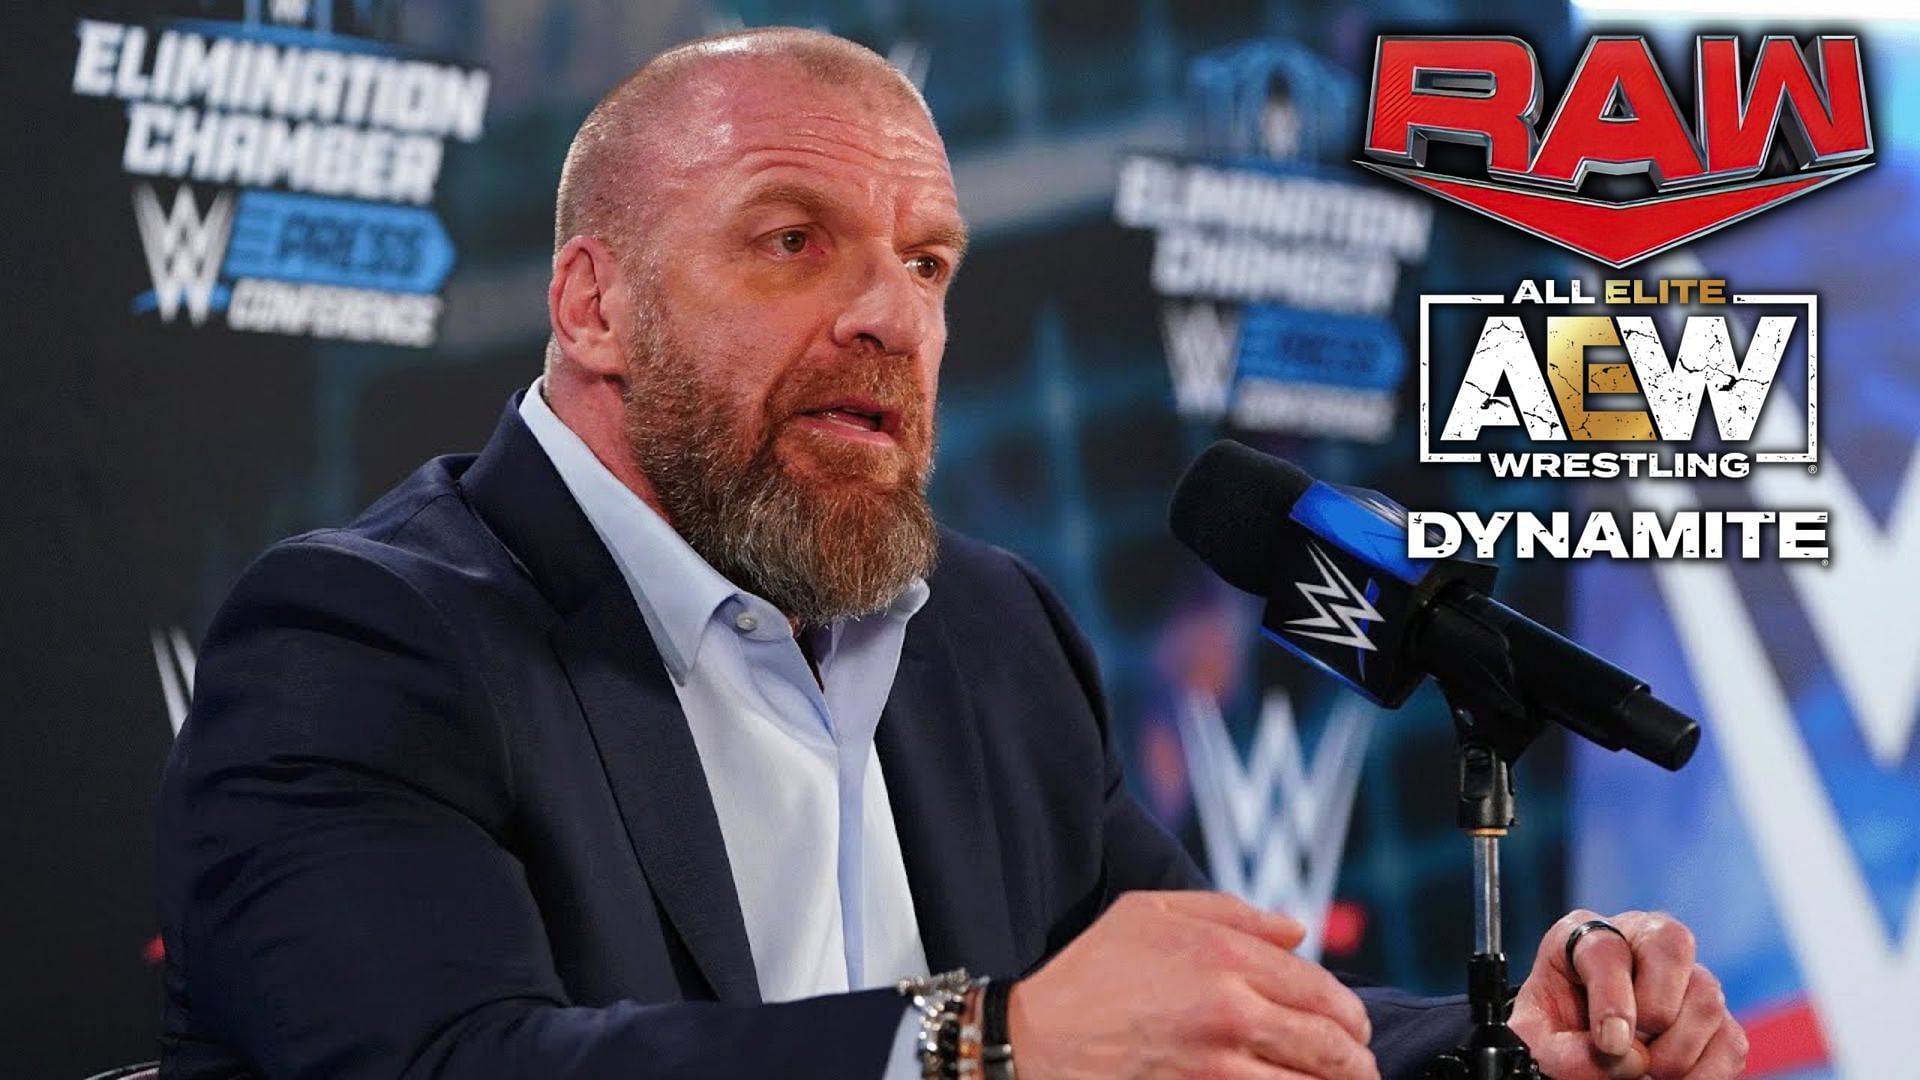 Triple H has been praised for his booking decisions as the CCO